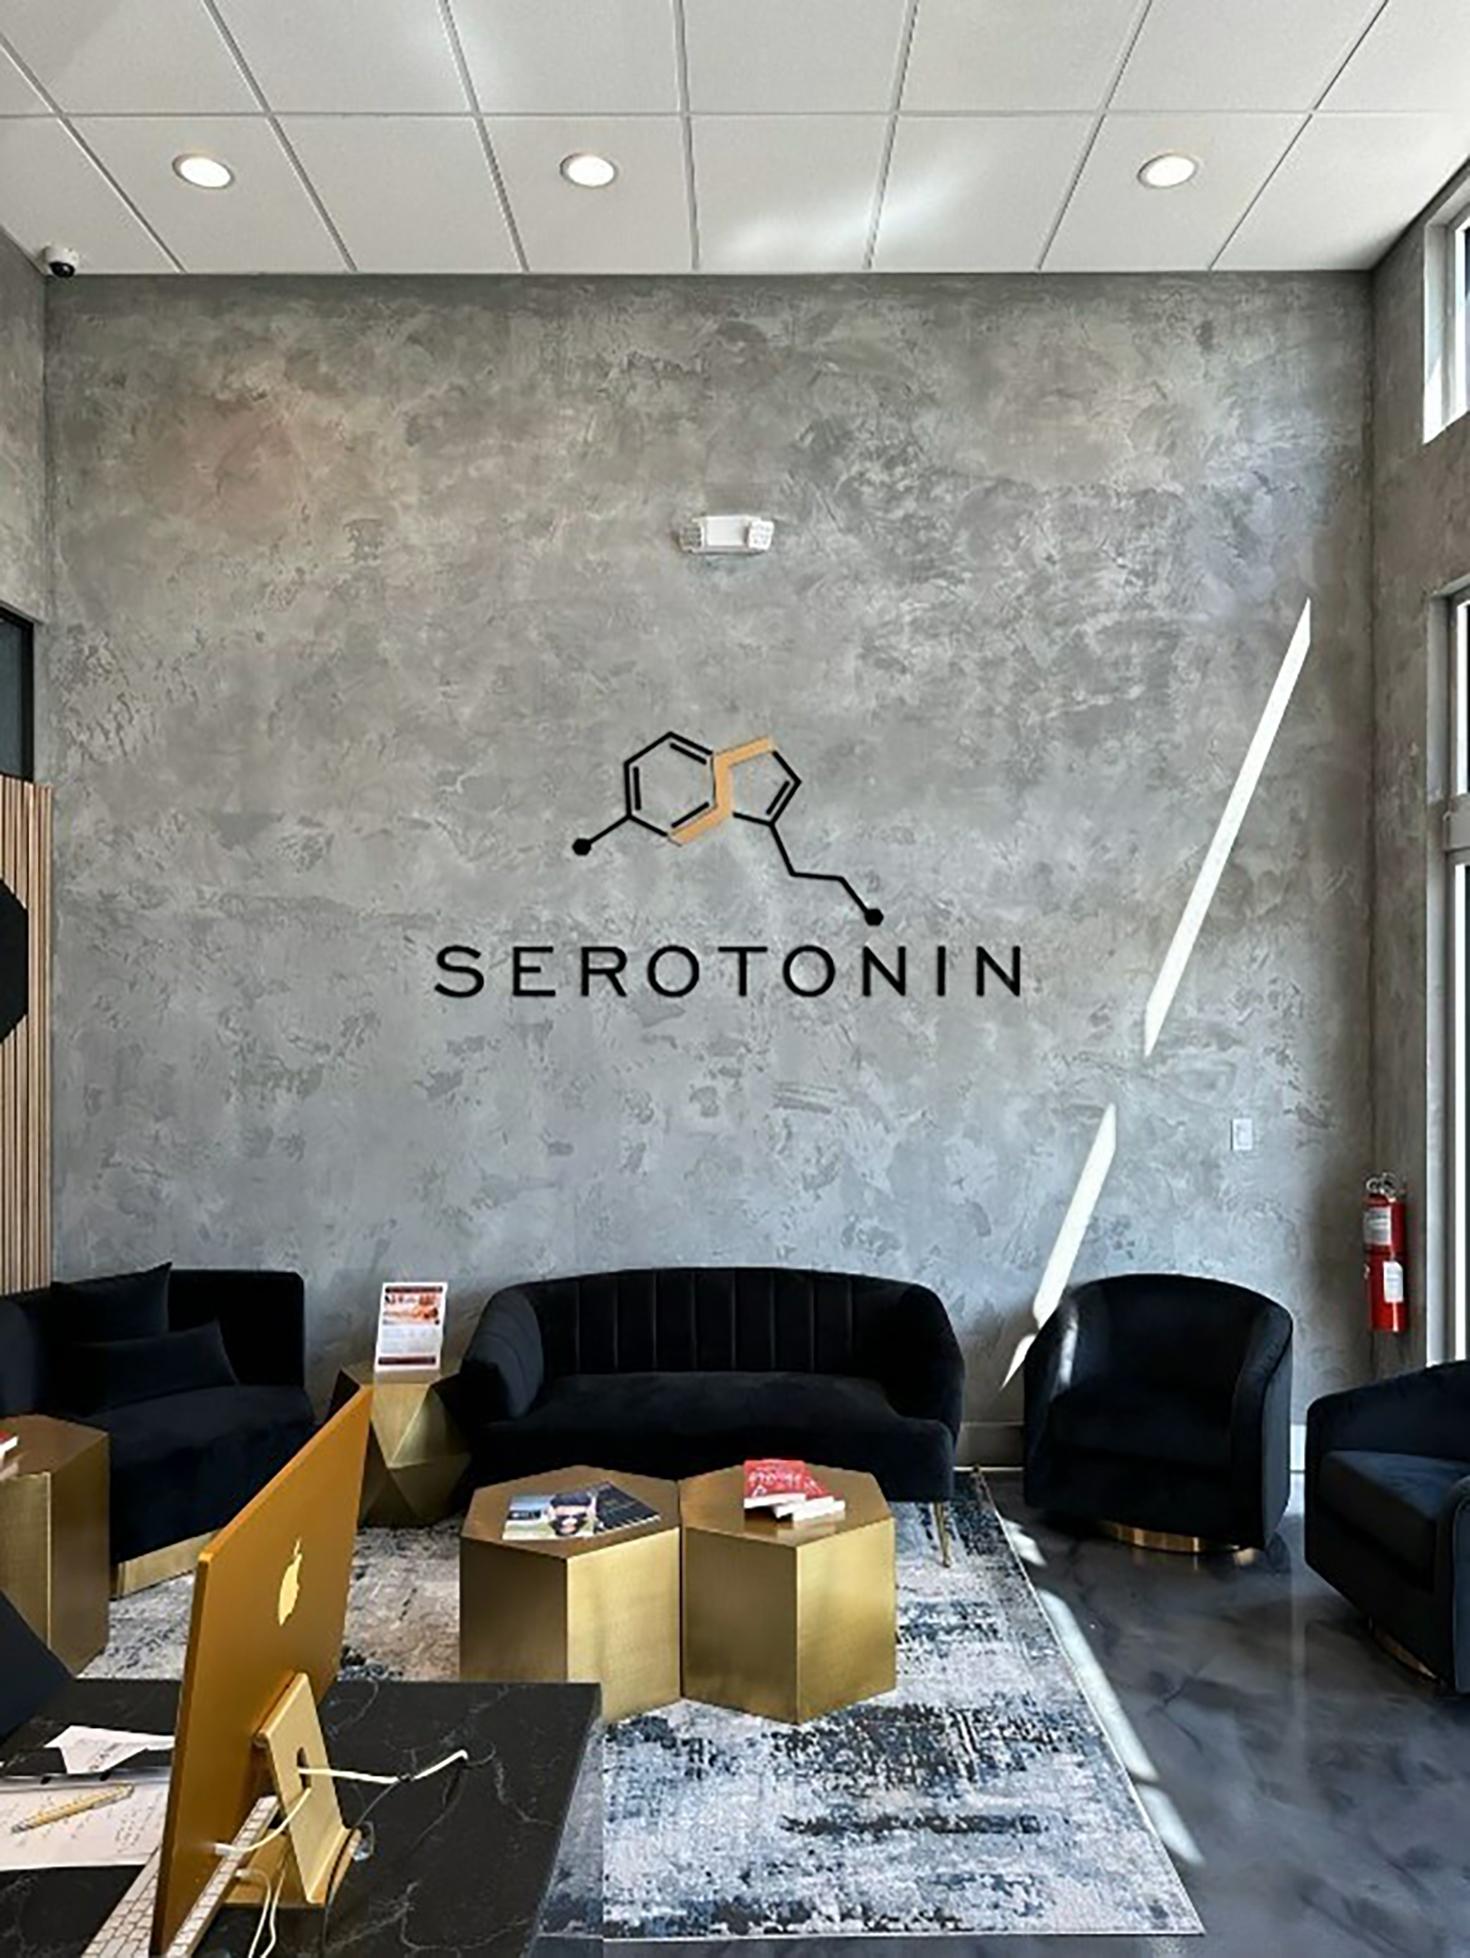 There are four Serotonin centres open in the US, with a further 26 in development / Serotonin Centers